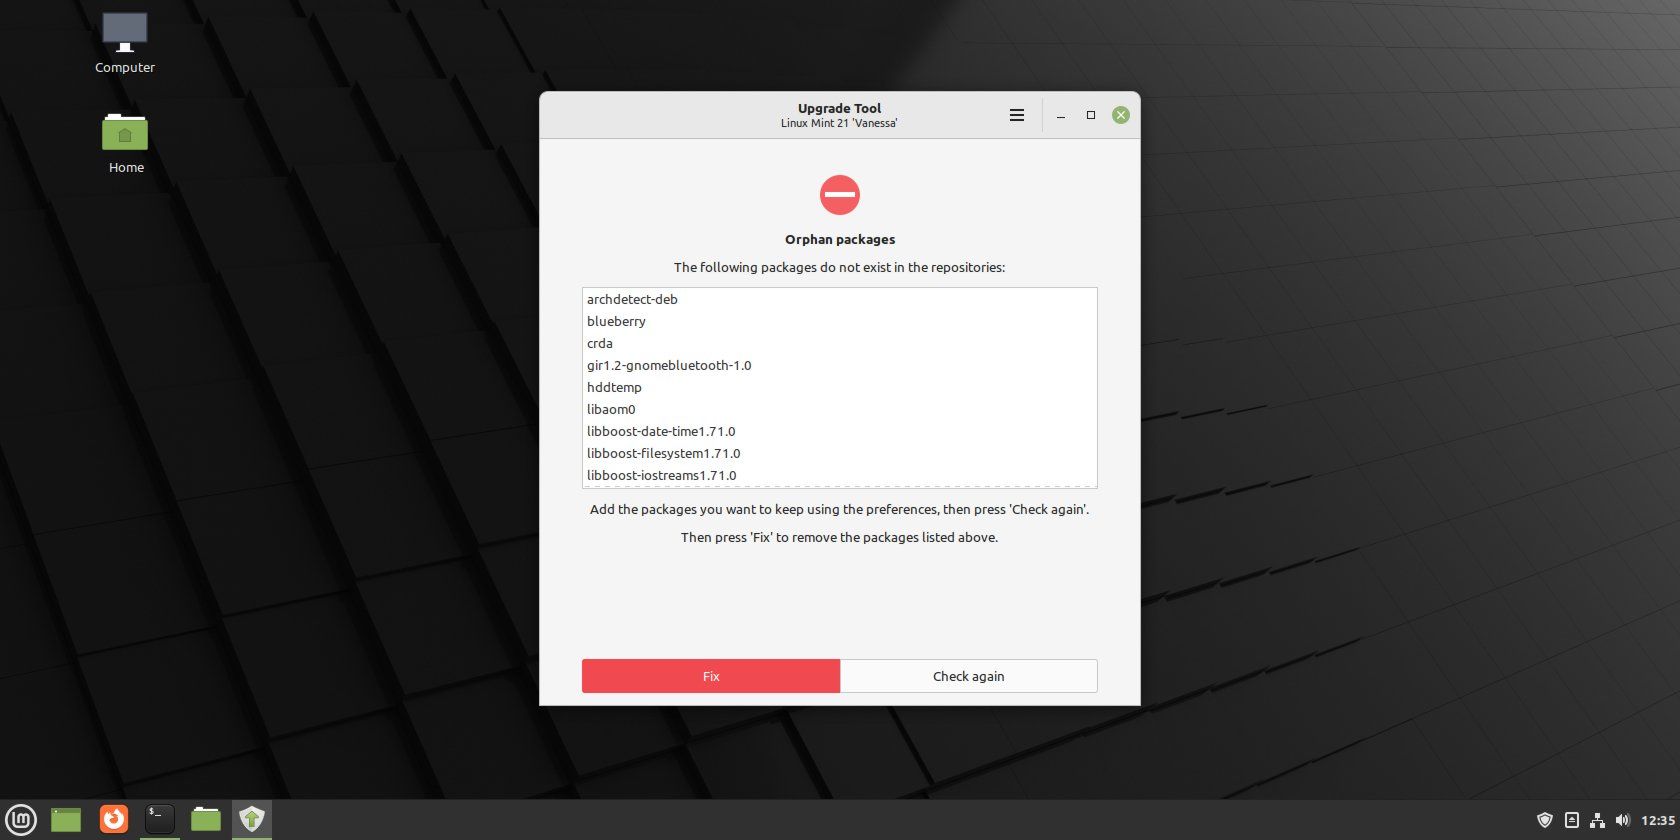 The Linux Mint Upgrade Tool Orphan Packages screen.